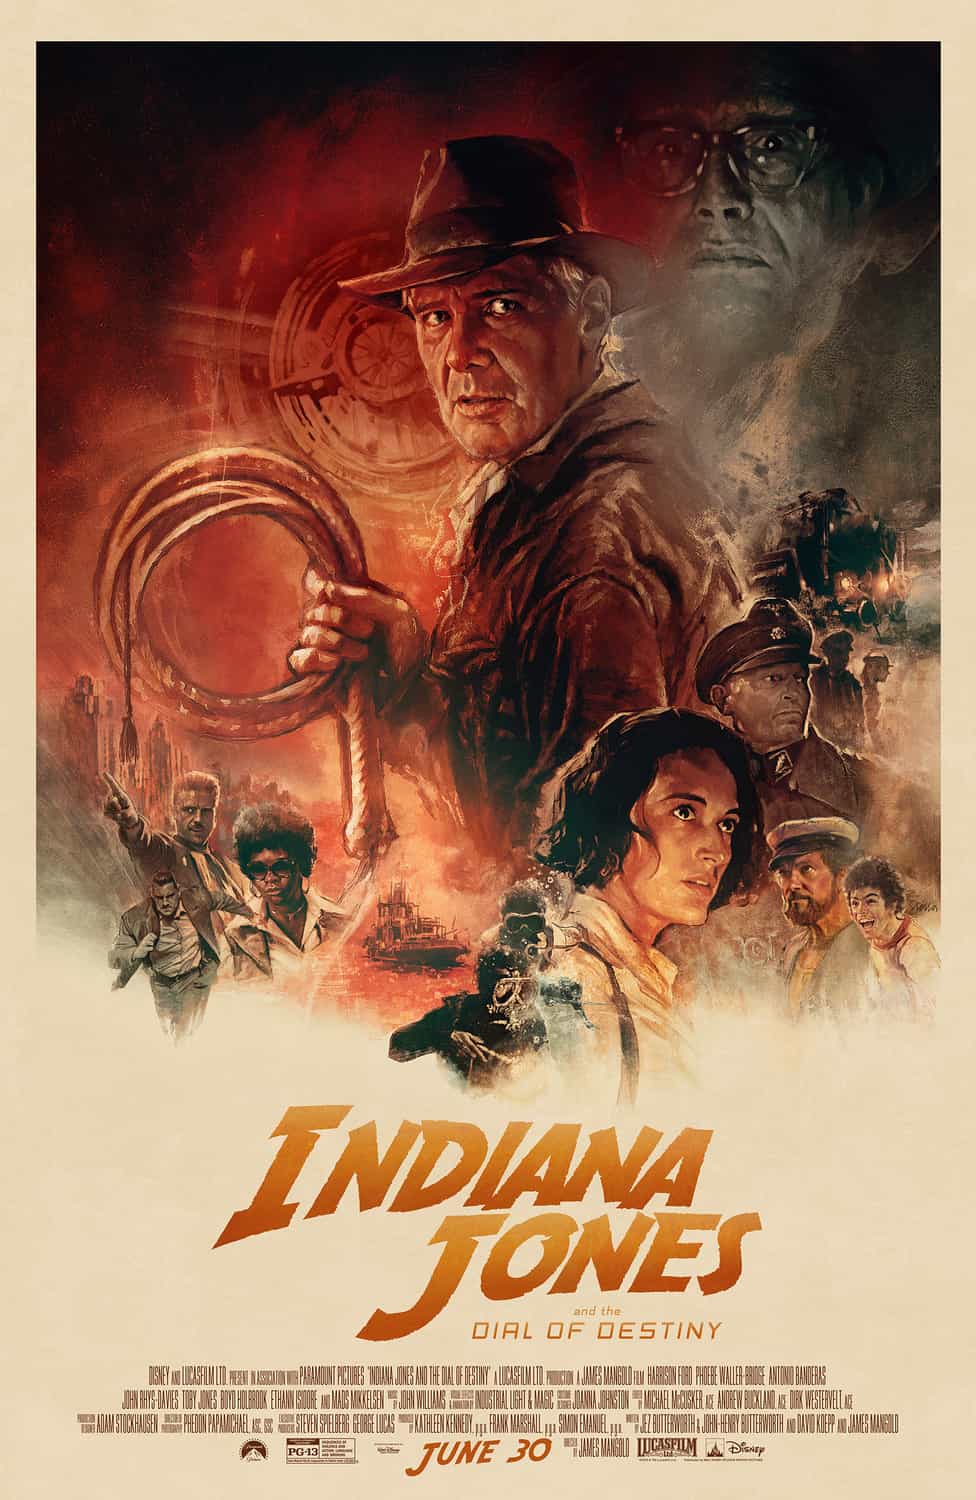 Indiana Jones and the Dial of Destiny is given a 12A age rating in the UK for moderate violence, threat, injury detail